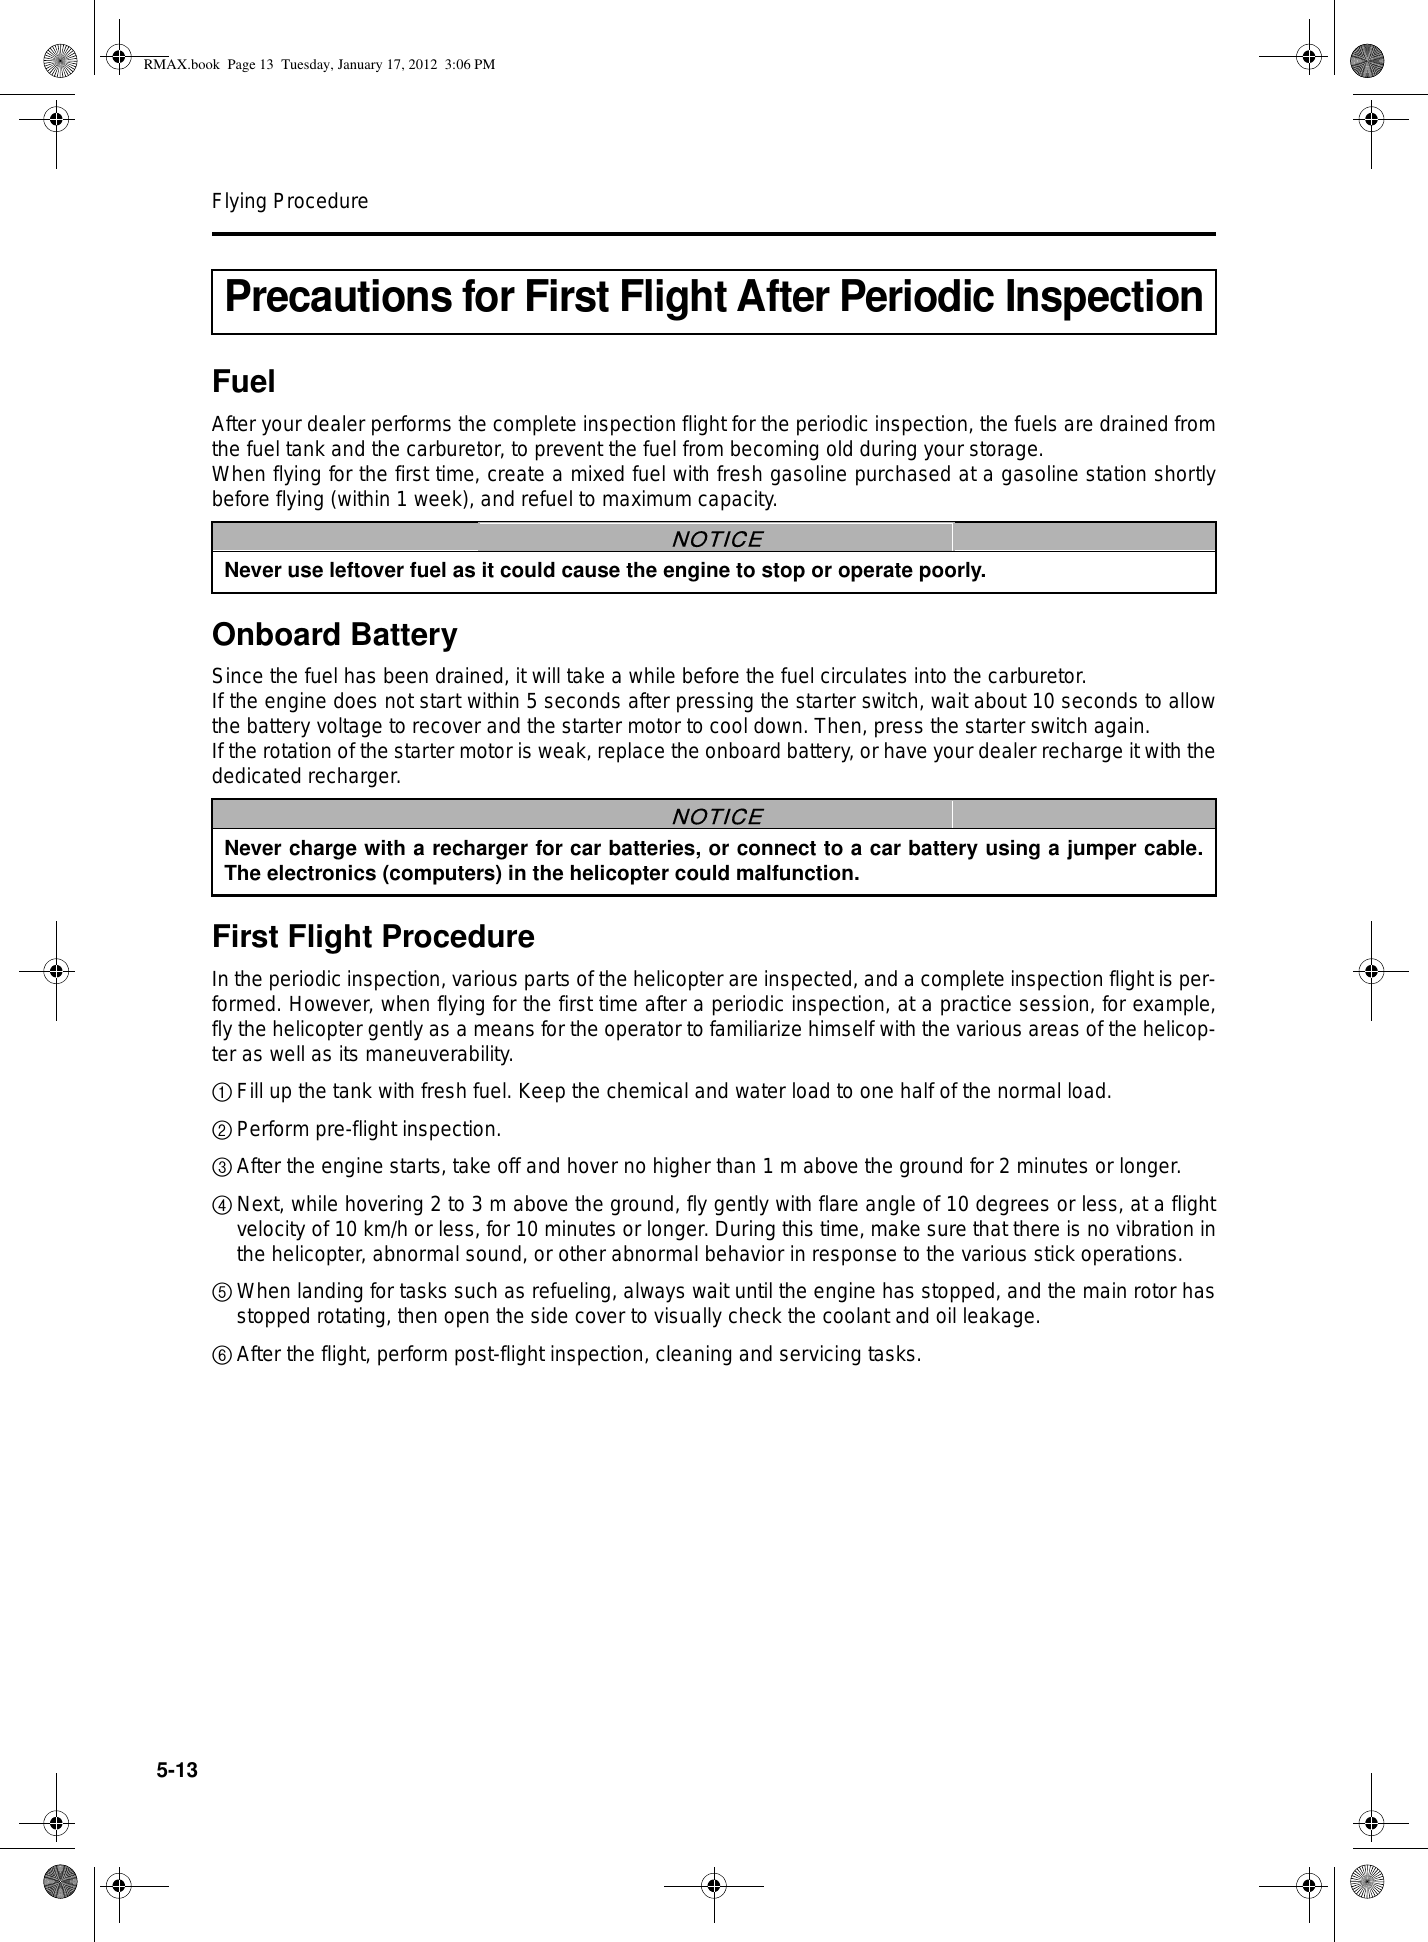 Flying Procedure5-13FuelAfter your dealer performs the complete inspection flight for the periodic inspection, the fuels are drained fromthe fuel tank and the carburetor, to prevent the fuel from becoming old during your storage.When flying for the first time, create a mixed fuel with fresh gasoline purchased at a gasoline station shortlybefore flying (within 1 week), and refuel to maximum capacity.Onboard BatterySince the fuel has been drained, it will take a while before the fuel circulates into the carburetor.If the engine does not start within 5 seconds after pressing the starter switch, wait about 10 seconds to allowthe battery voltage to recover and the starter motor to cool down. Then, press the starter switch again.If the rotation of the starter motor is weak, replace the onboard battery, or have your dealer recharge it with thededicated recharger.First Flight ProcedureIn the periodic inspection, various parts of the helicopter are inspected, and a complete inspection flight is per-formed. However, when flying for the first time after a periodic inspection, at a practice session, for example,fly the helicopter gently as a means for the operator to familiarize himself with the various areas of the helicop-ter as well as its maneuverability.1Fill up the tank with fresh fuel. Keep the chemical and water load to one half of the normal load.2Perform pre-flight inspection.3After the engine starts, take off and hover no higher than 1 m above the ground for 2 minutes or longer.4Next, while hovering 2 to 3 m above the ground, fly gently with flare angle of 10 degrees or less, at a flightvelocity of 10 km/h or less, for 10 minutes or longer. During this time, make sure that there is no vibration inthe helicopter, abnormal sound, or other abnormal behavior in response to the various stick operations.5When landing for tasks such as refueling, always wait until the engine has stopped, and the main rotor hasstopped rotating, then open the side cover to visually check the coolant and oil leakage.6After the flight, perform post-flight inspection, cleaning and servicing tasks.Precautions for First Flight After Periodic InspectionNever use leftover fuel as it could cause the engine to stop or operate poorly.NOTICENever charge with a recharger for car batteries, or connect to a car battery using a jumper cable.The electronics (computers) in the helicopter could malfunction.NOTICERMAX.book  Page 13  Tuesday, January 17, 2012  3:06 PM